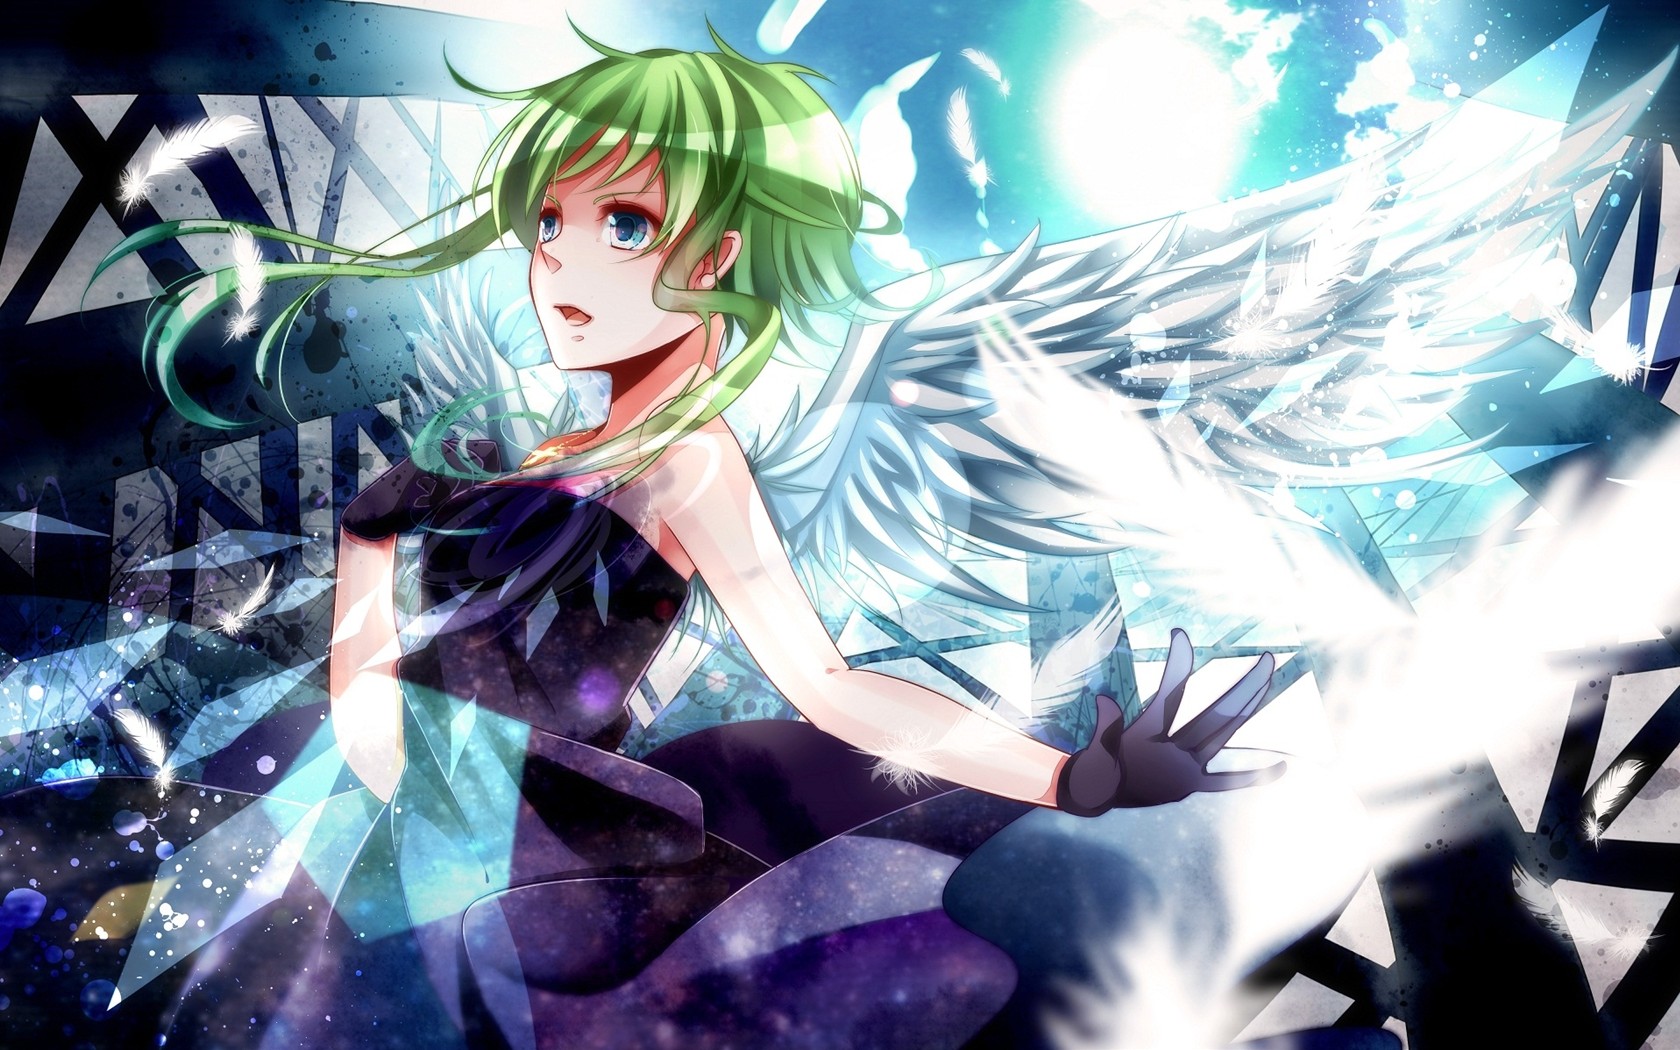 Gumi 壁紙no 40 42 Vocaloid ボーカロイド 壁紙家